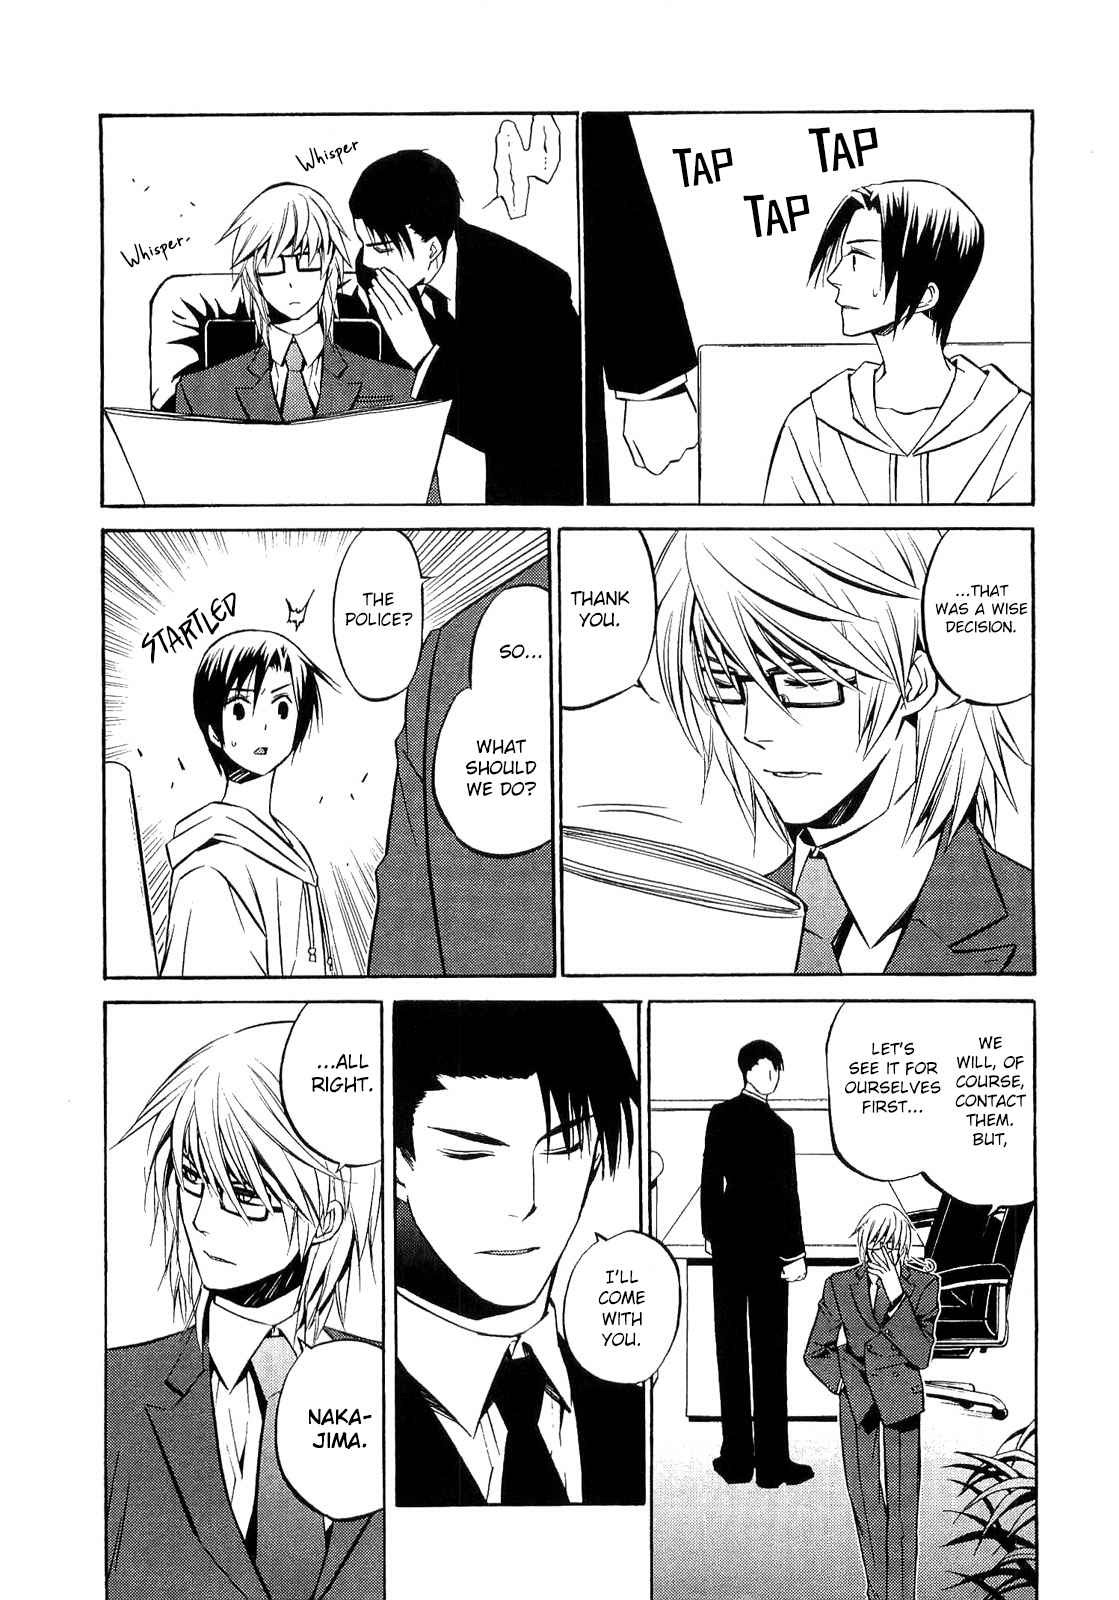 893 Ways to Become a Detective Vol. 3 Ch. 17 The Gun 1